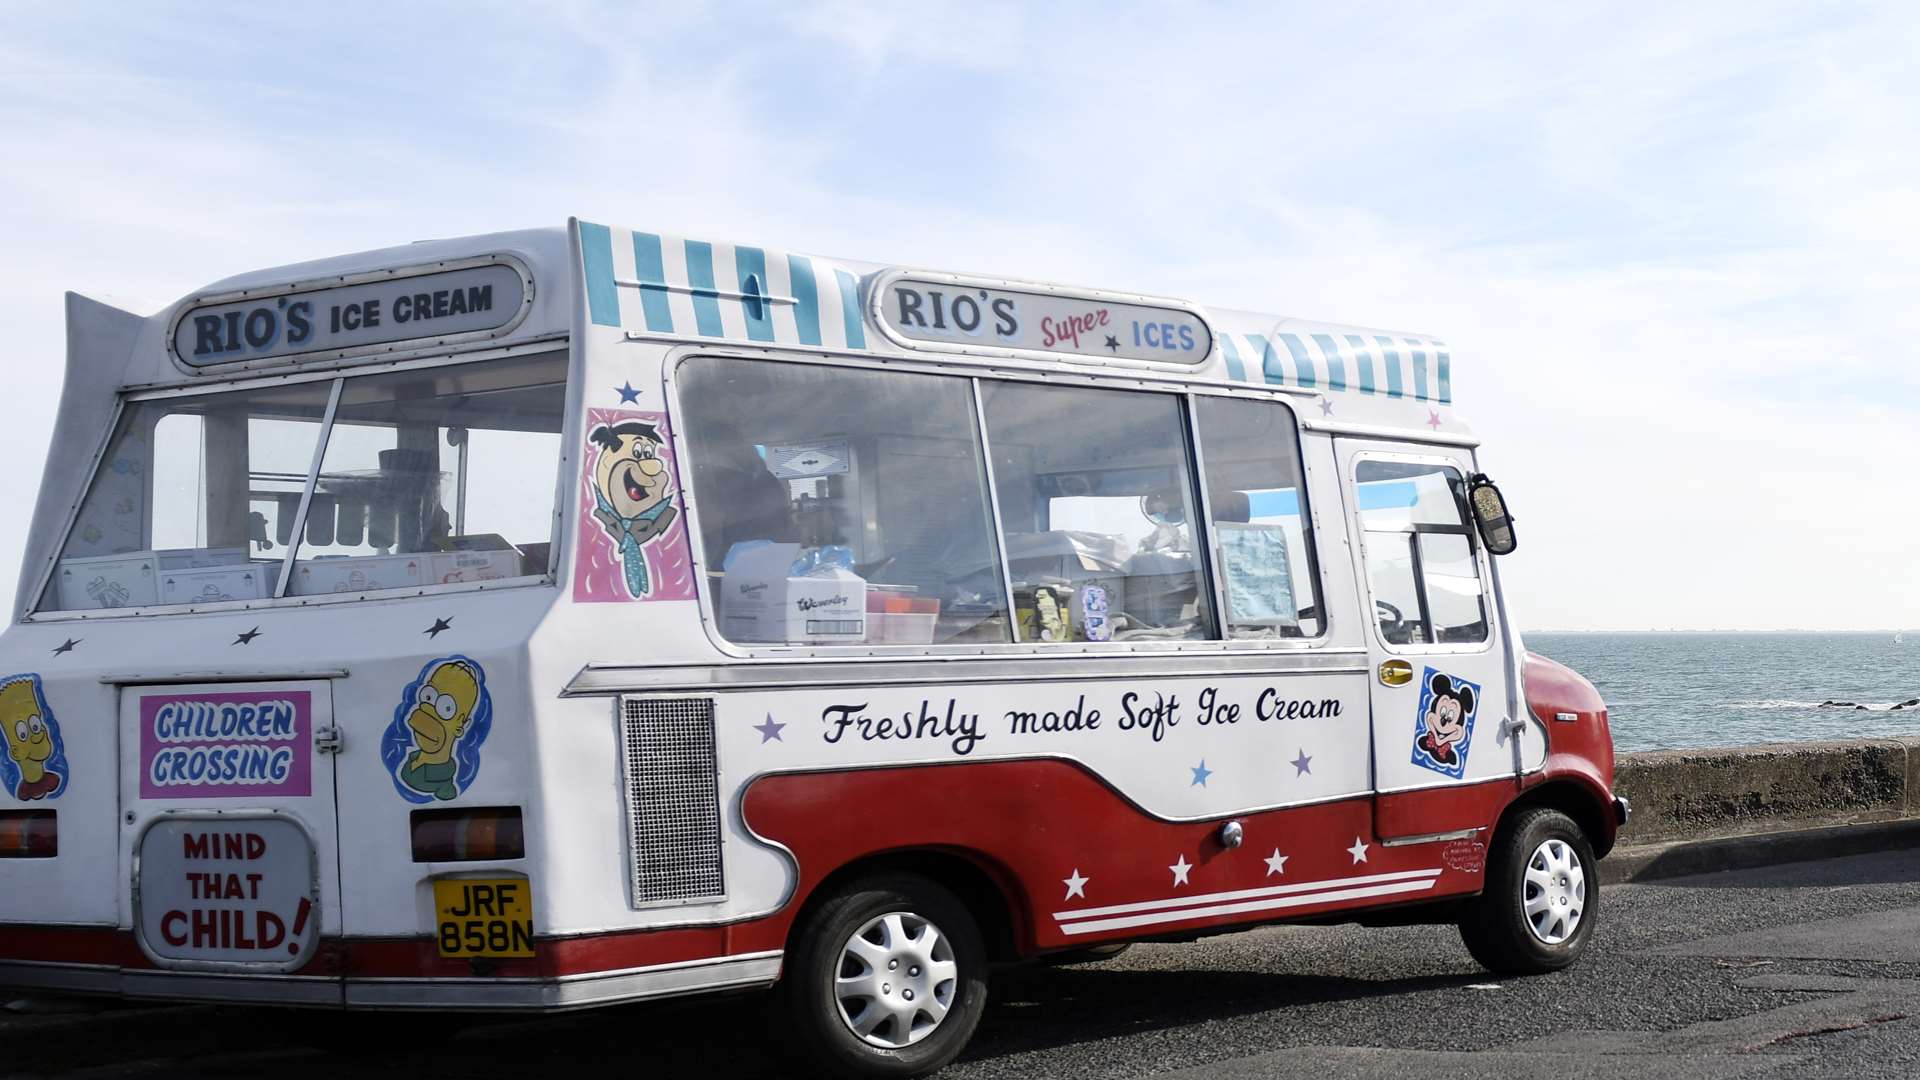 Shepway District Council has ordered Rio’s ice cream van to from its traditional pitch